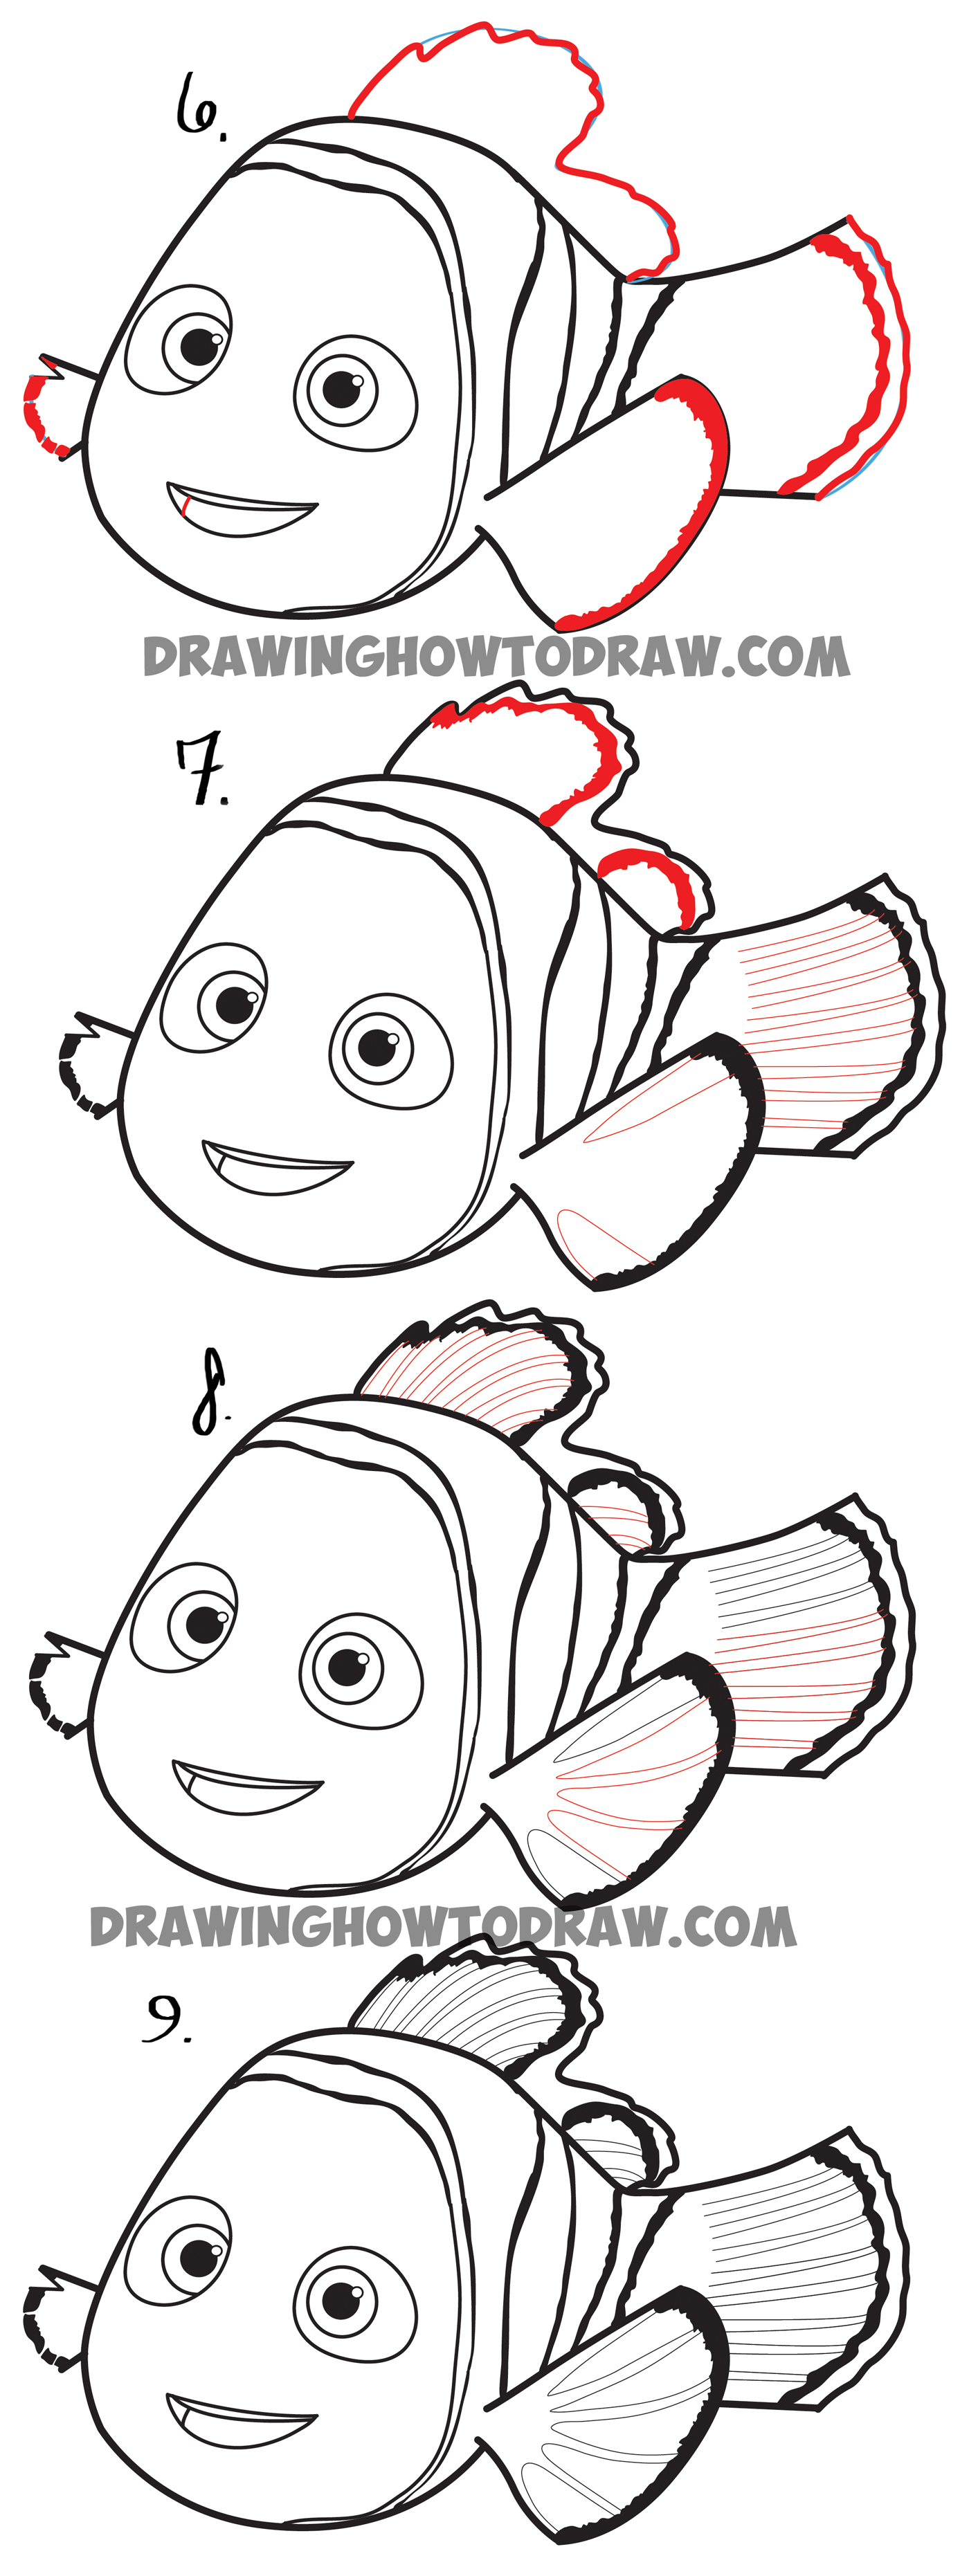 How to Draw Nemo from Disney's Finding Dory Step by Step Drawing